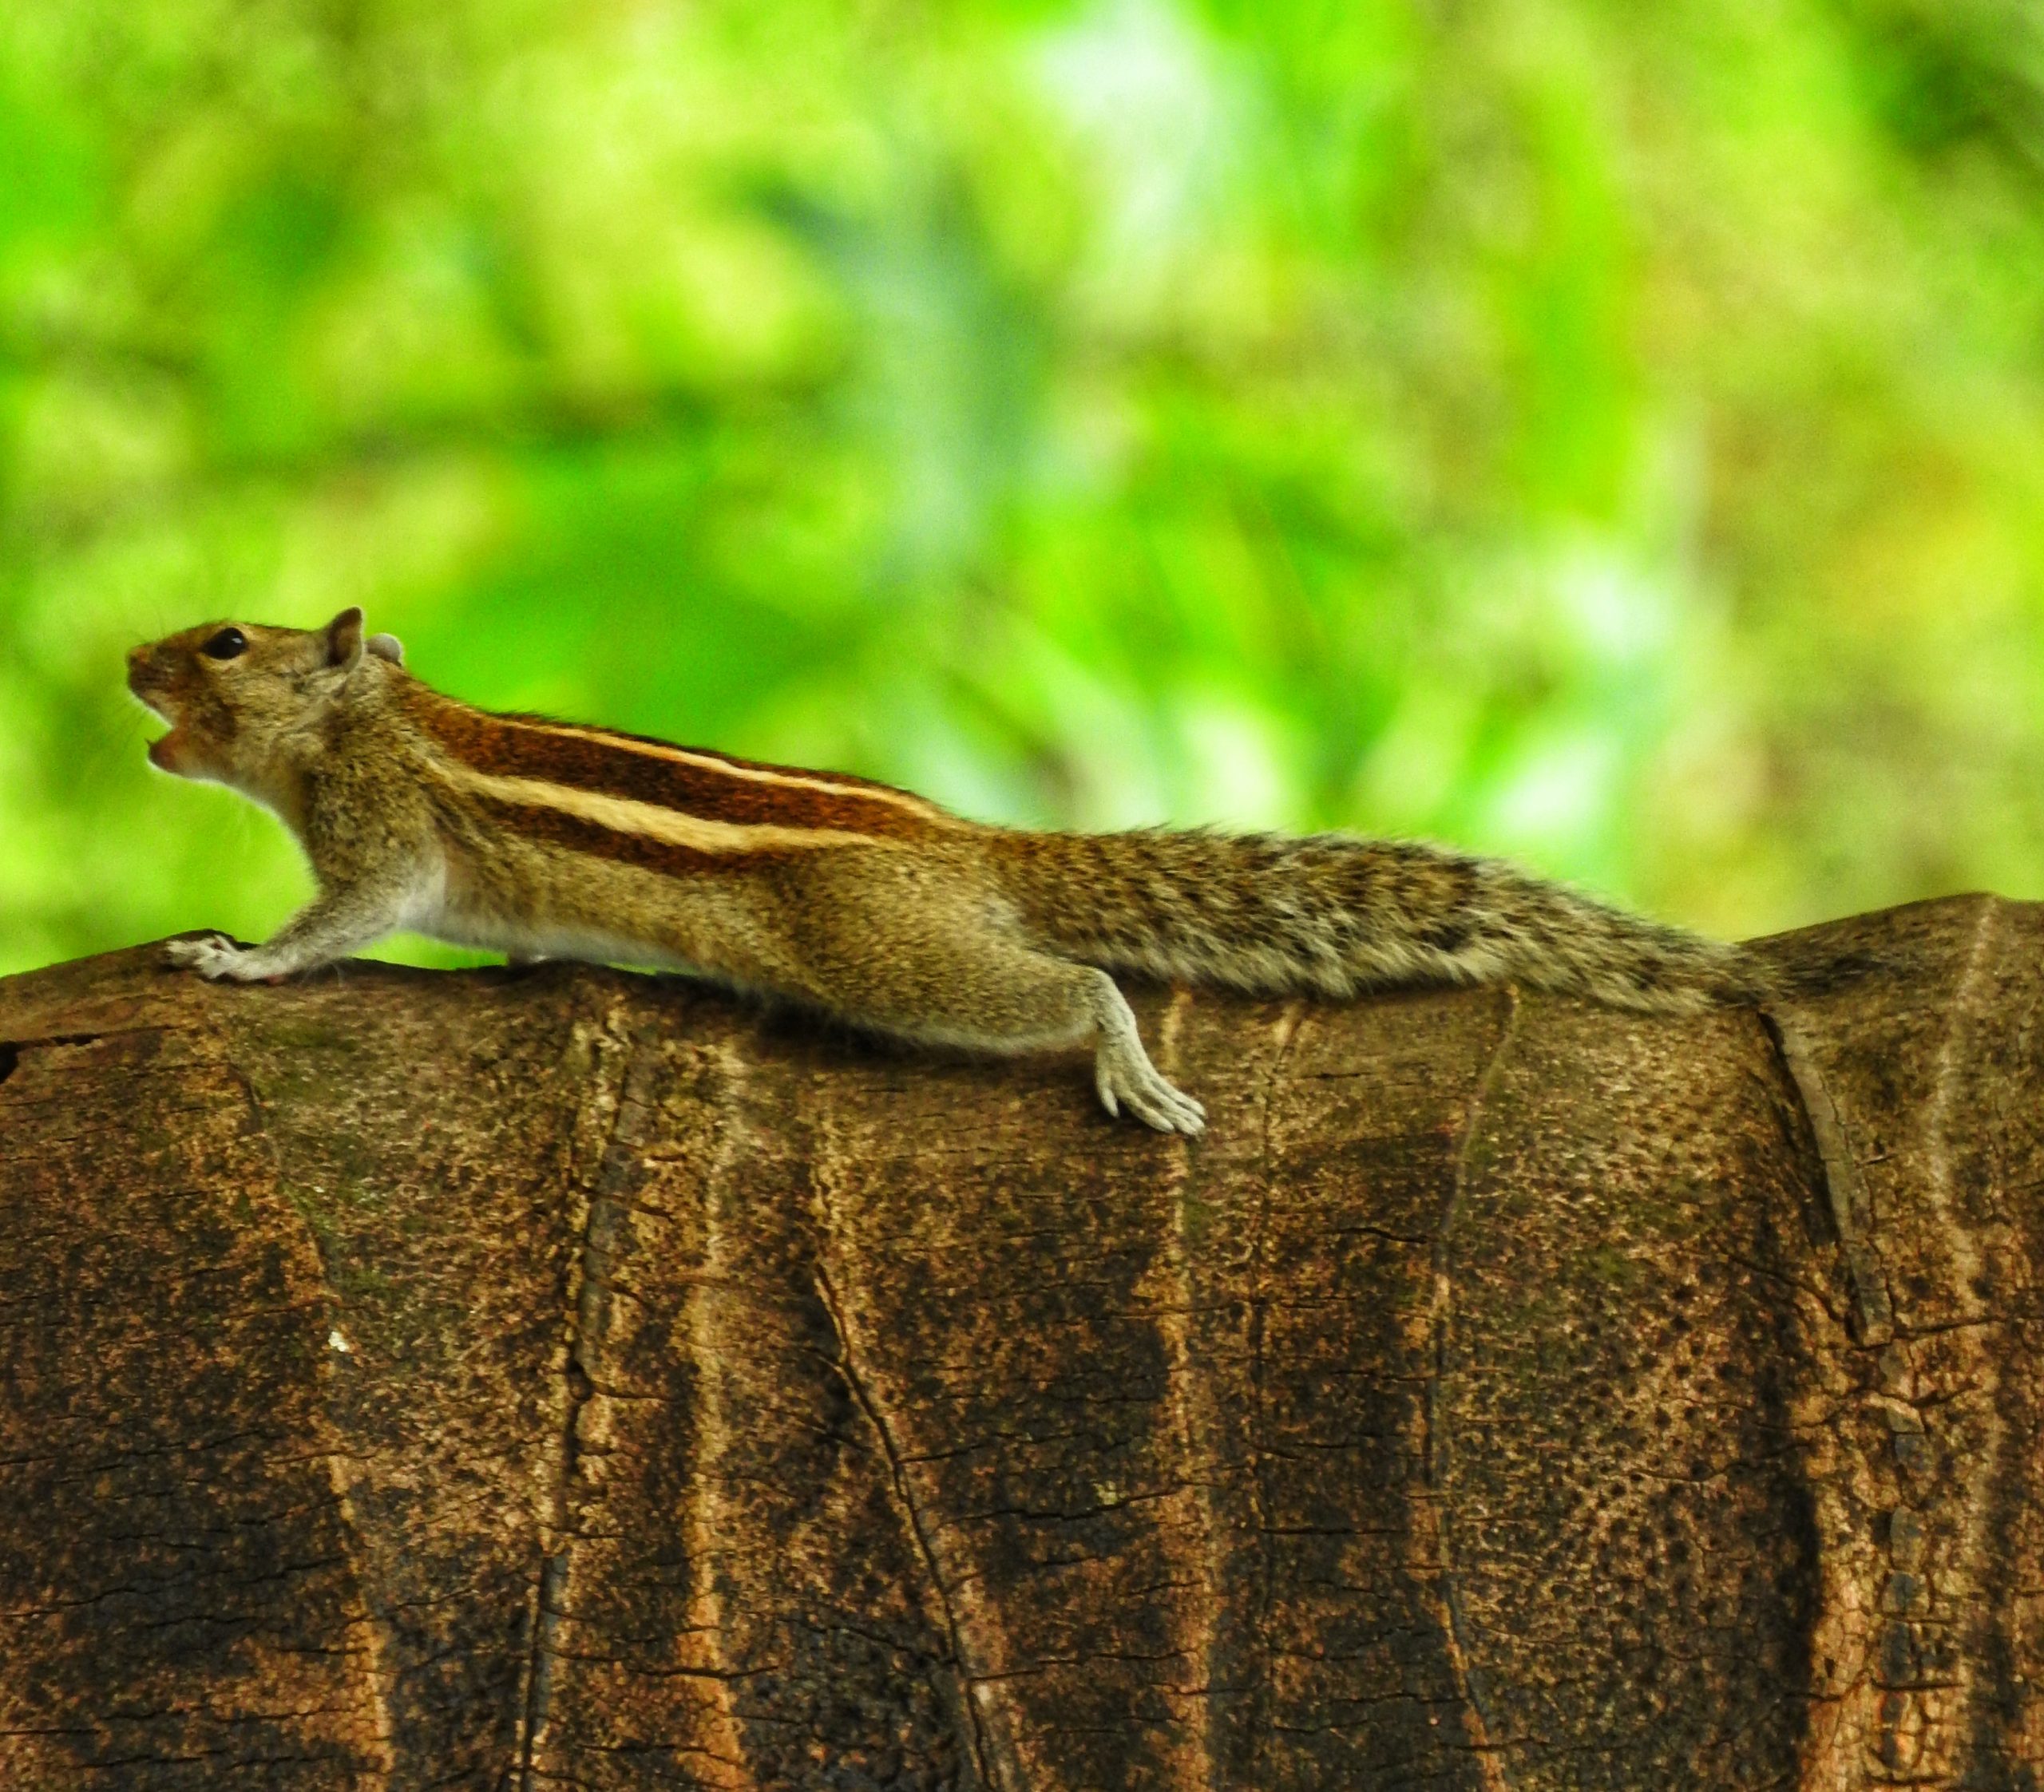 squirrel on a tree trunk